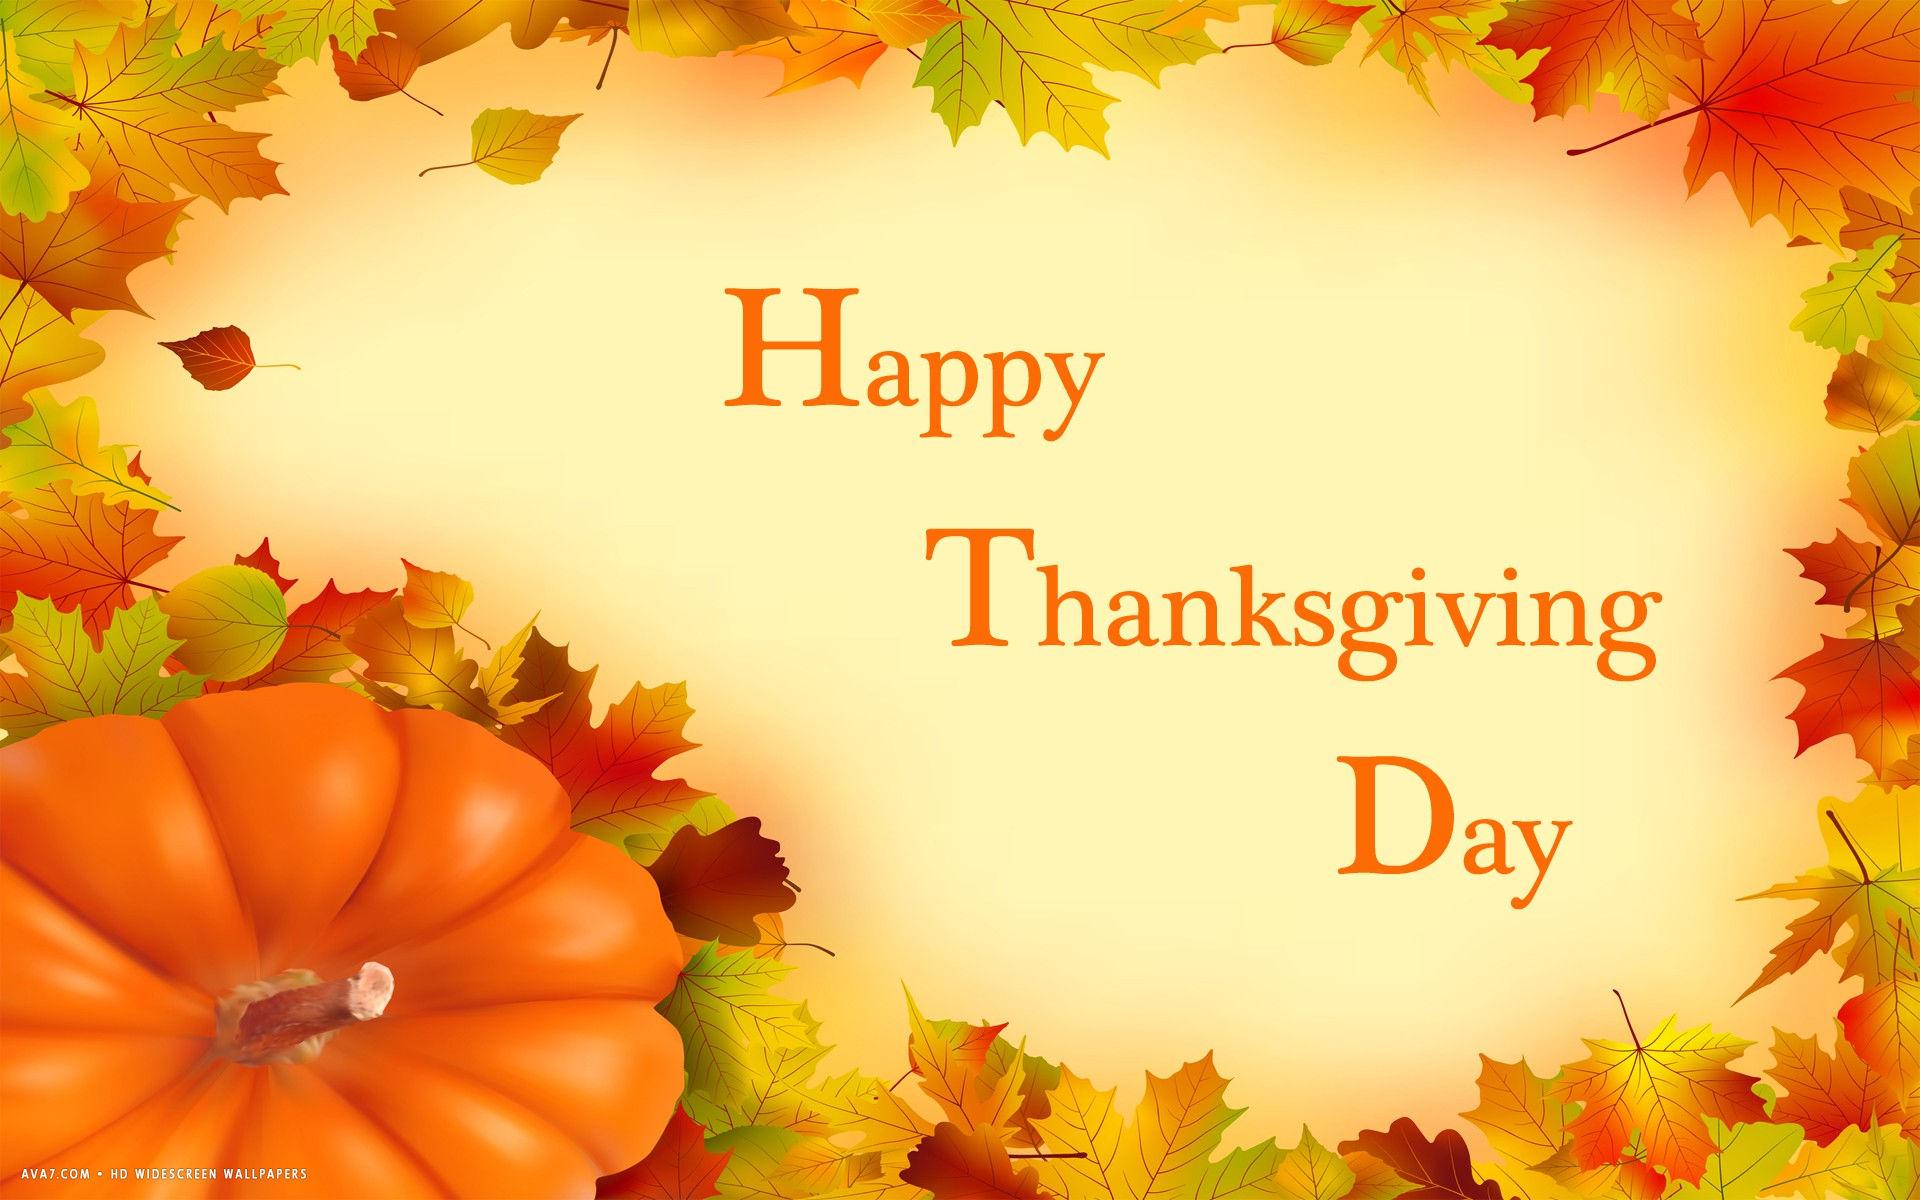 happy thanksgiving day wishes pumpkin yellow red leaves holiday HD widescreen wallpaper / holidays background